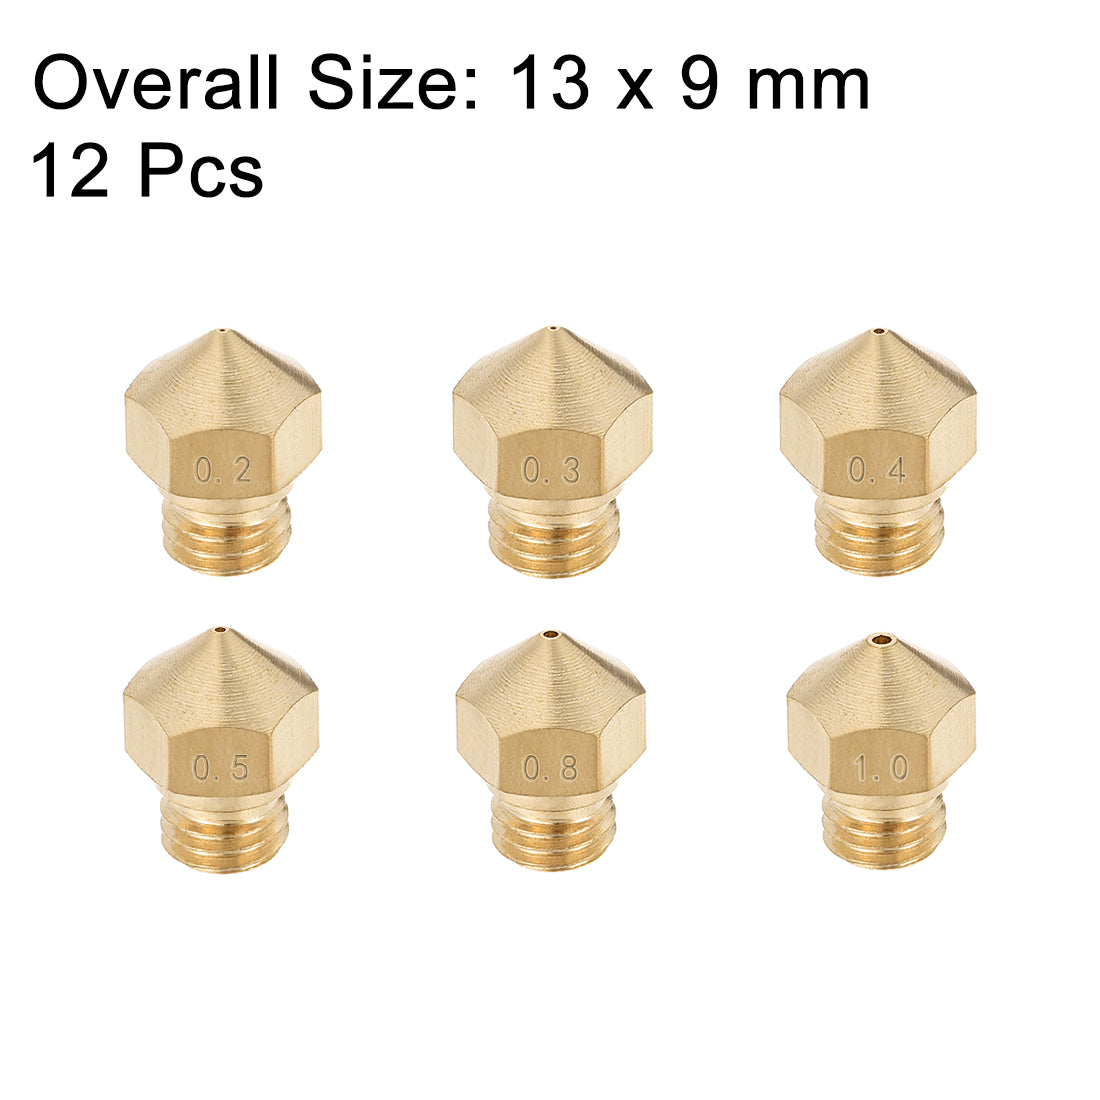 uxcell Uxcell 3D Printer Nozzle Fit for MK10,for 1.75mm Filament Brass,0.2mm - 1mm Total 12pcs